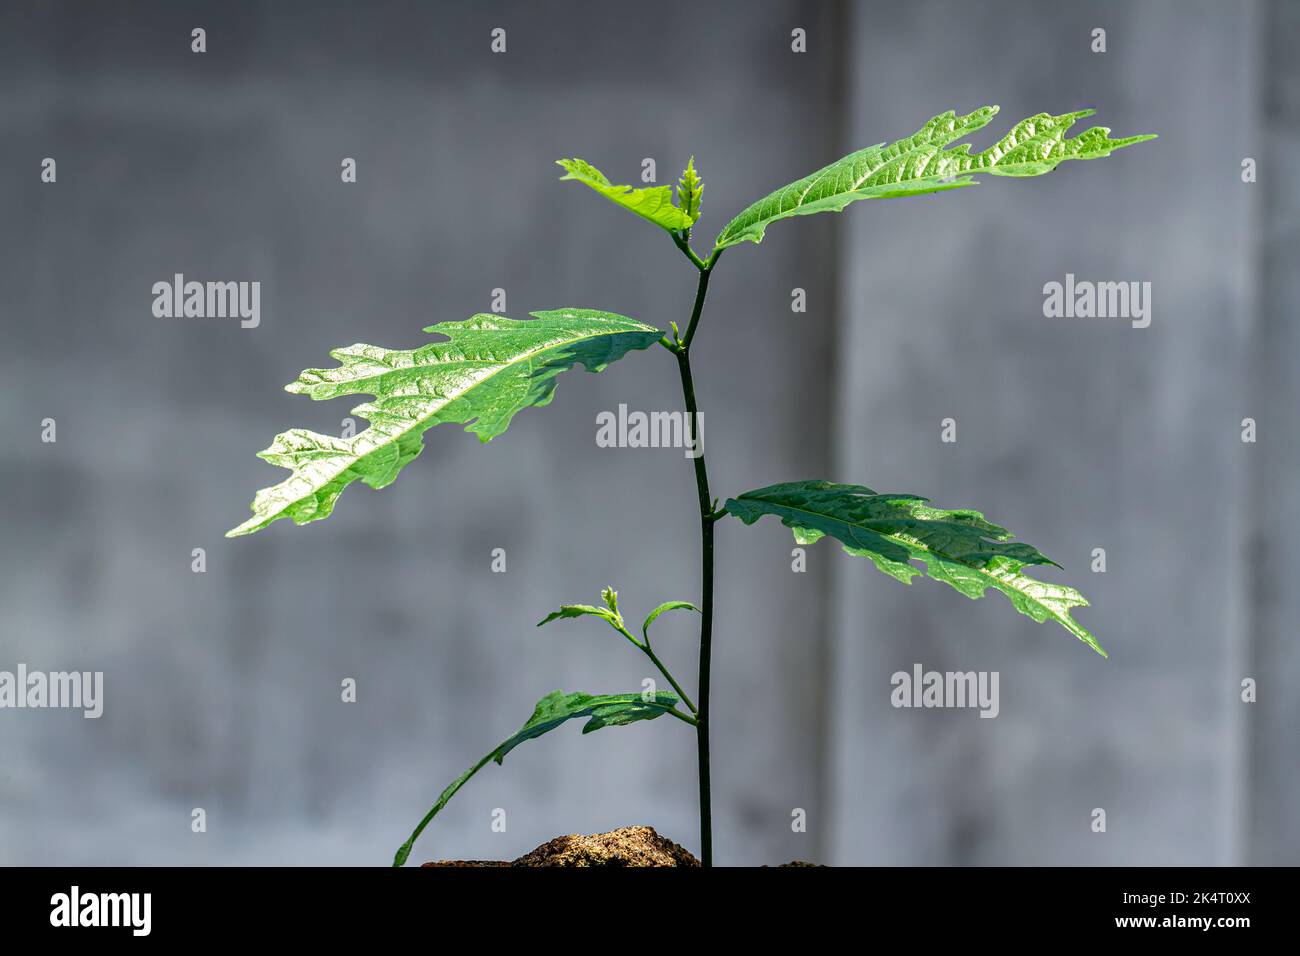 Euphorbiaceae plant that is uniquely shaped in green, isolated on a gray background Stock Photo